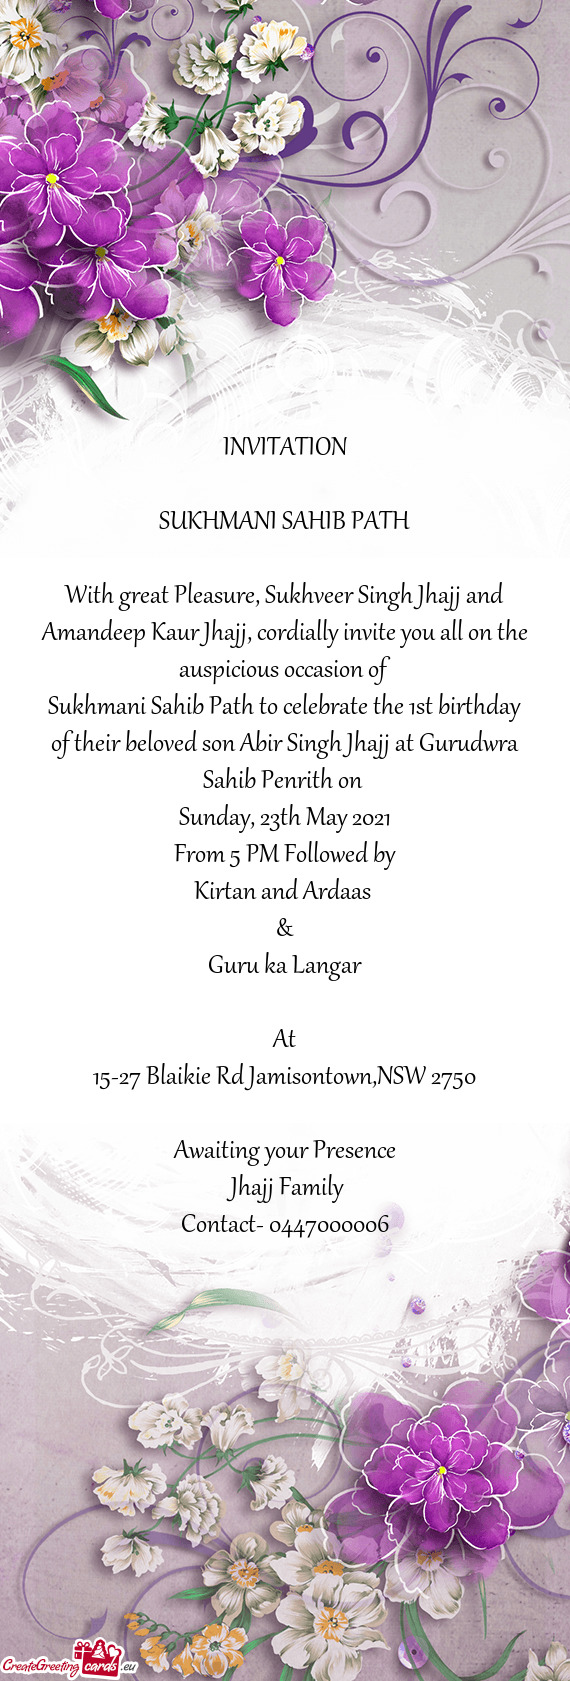 With great Pleasure, Sukhveer Singh Jhajj and Amandeep Kaur Jhajj, cordially invite you all on the a